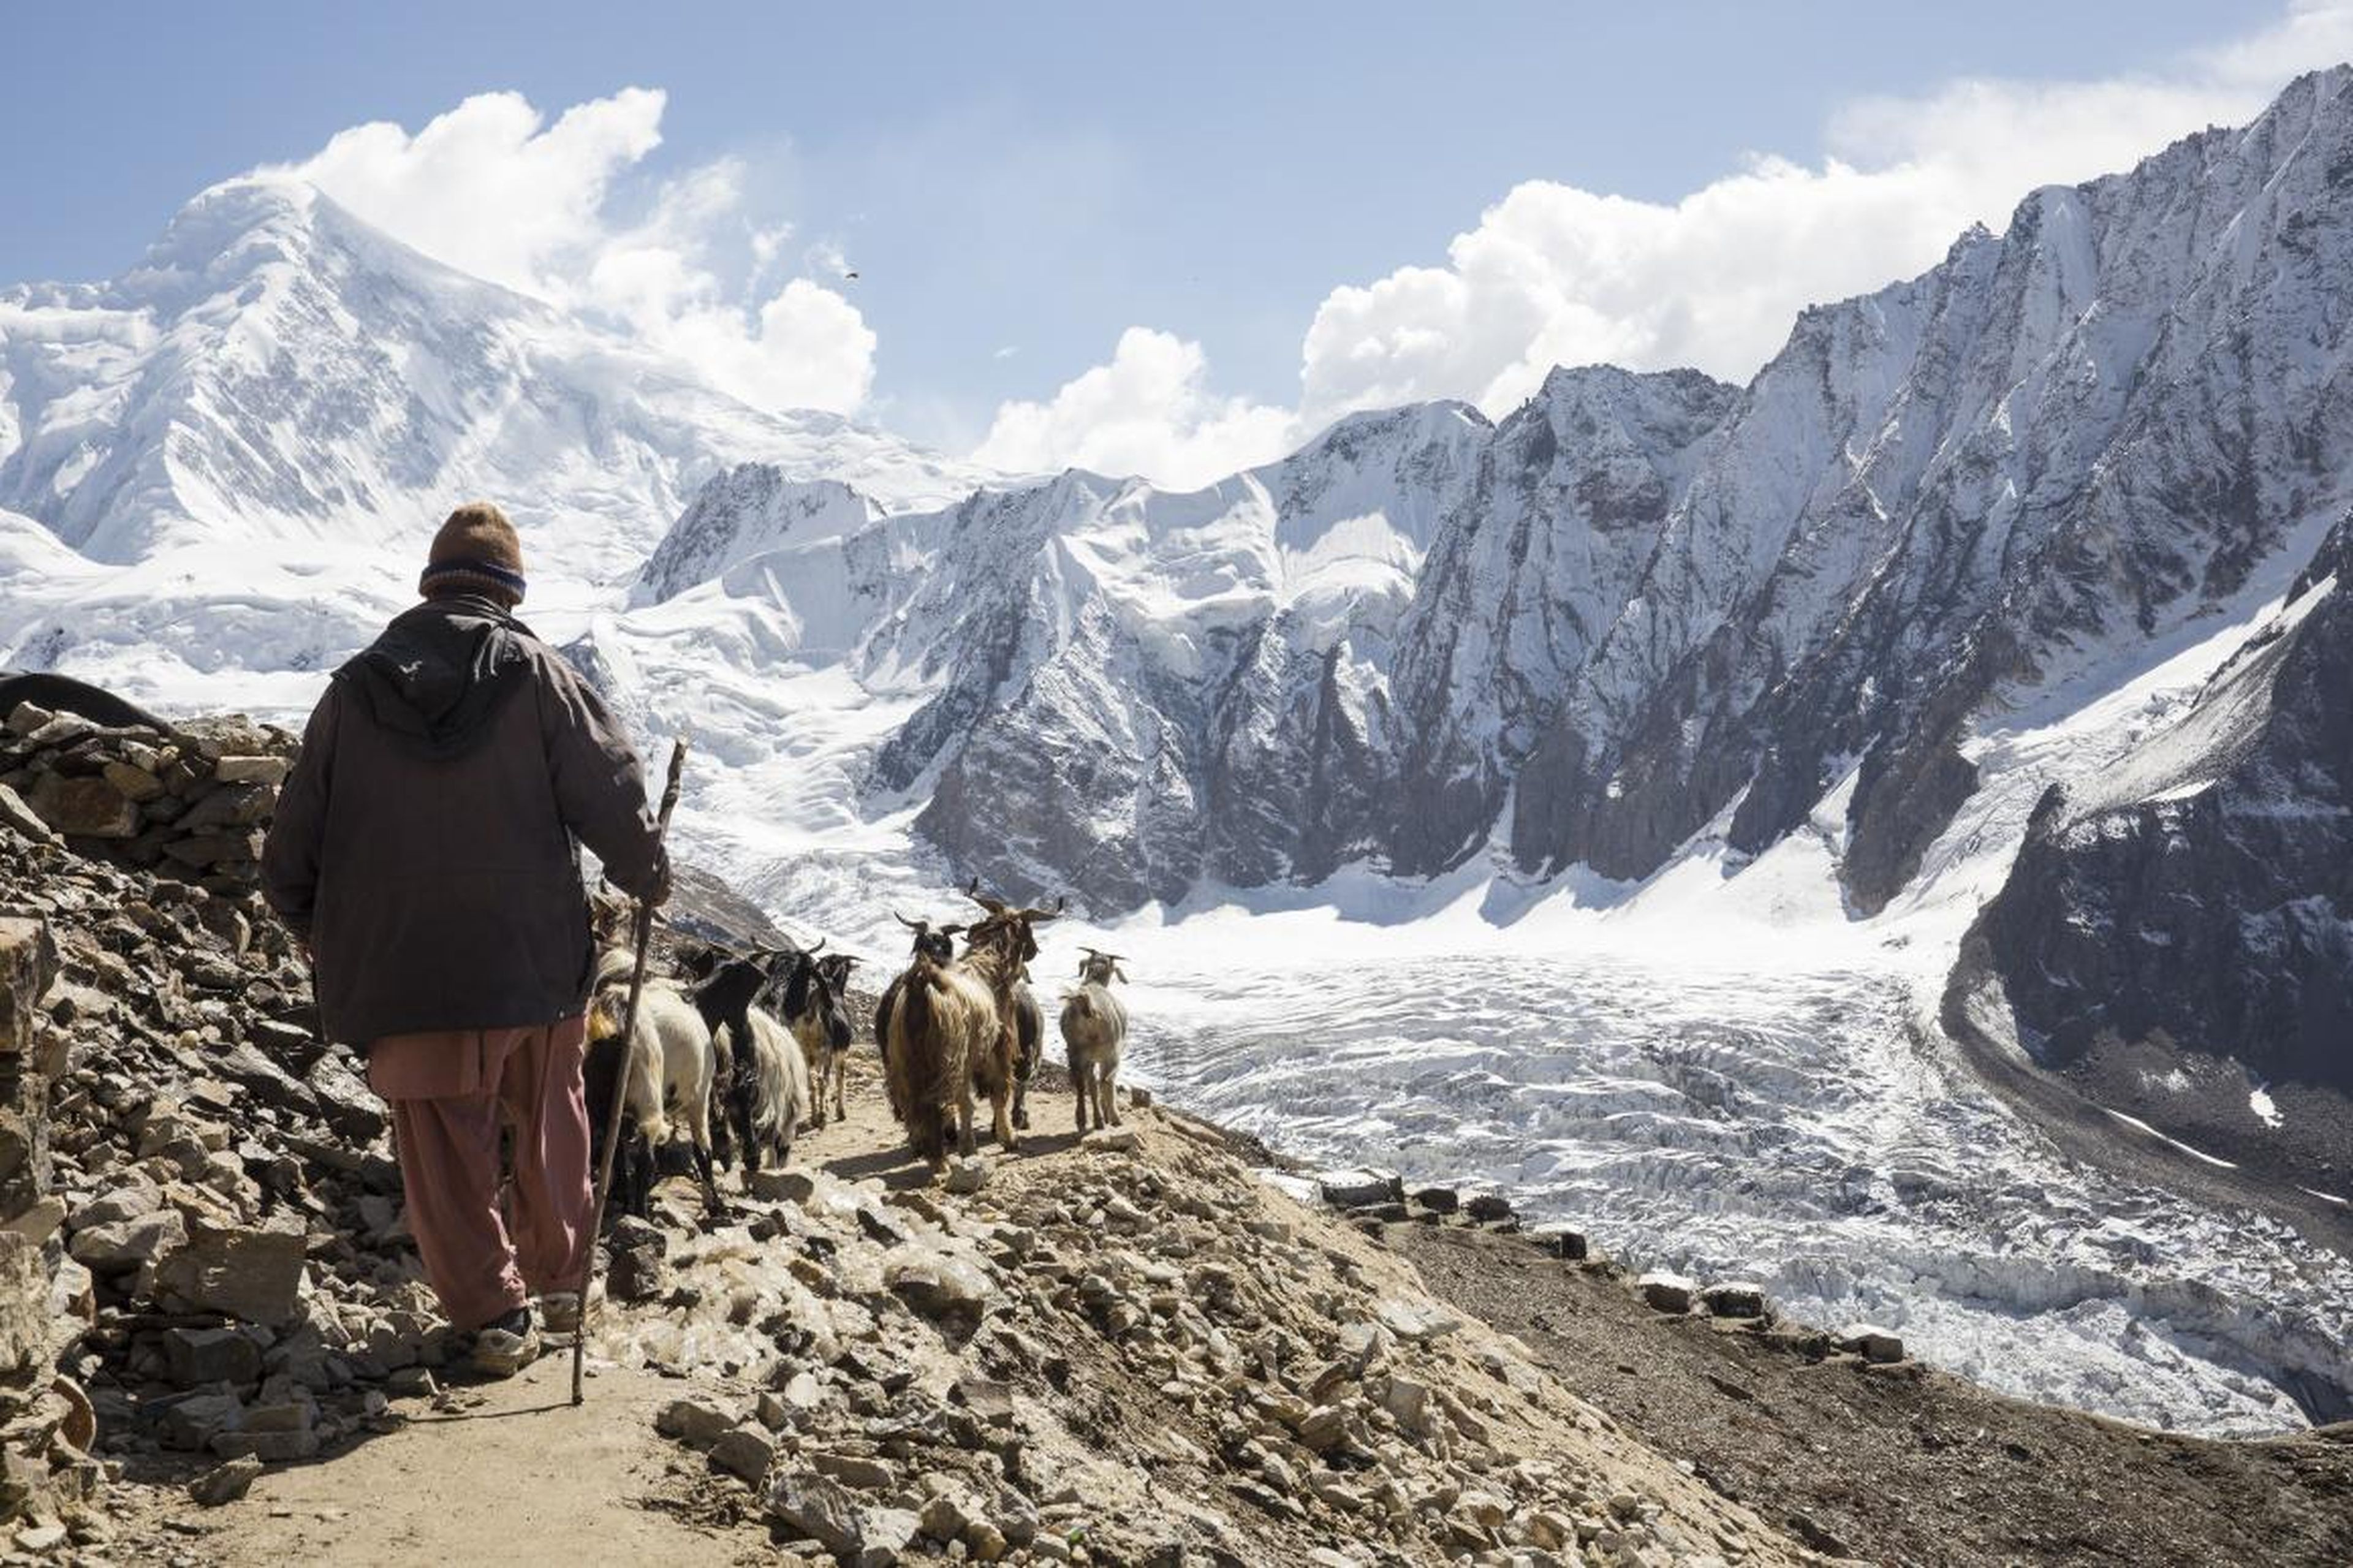 In this photo, a meat vendor brings goats to supply to the gem miners. Because of the high altitude, all the supplies and equipment must be brought in from the villages and valley below.